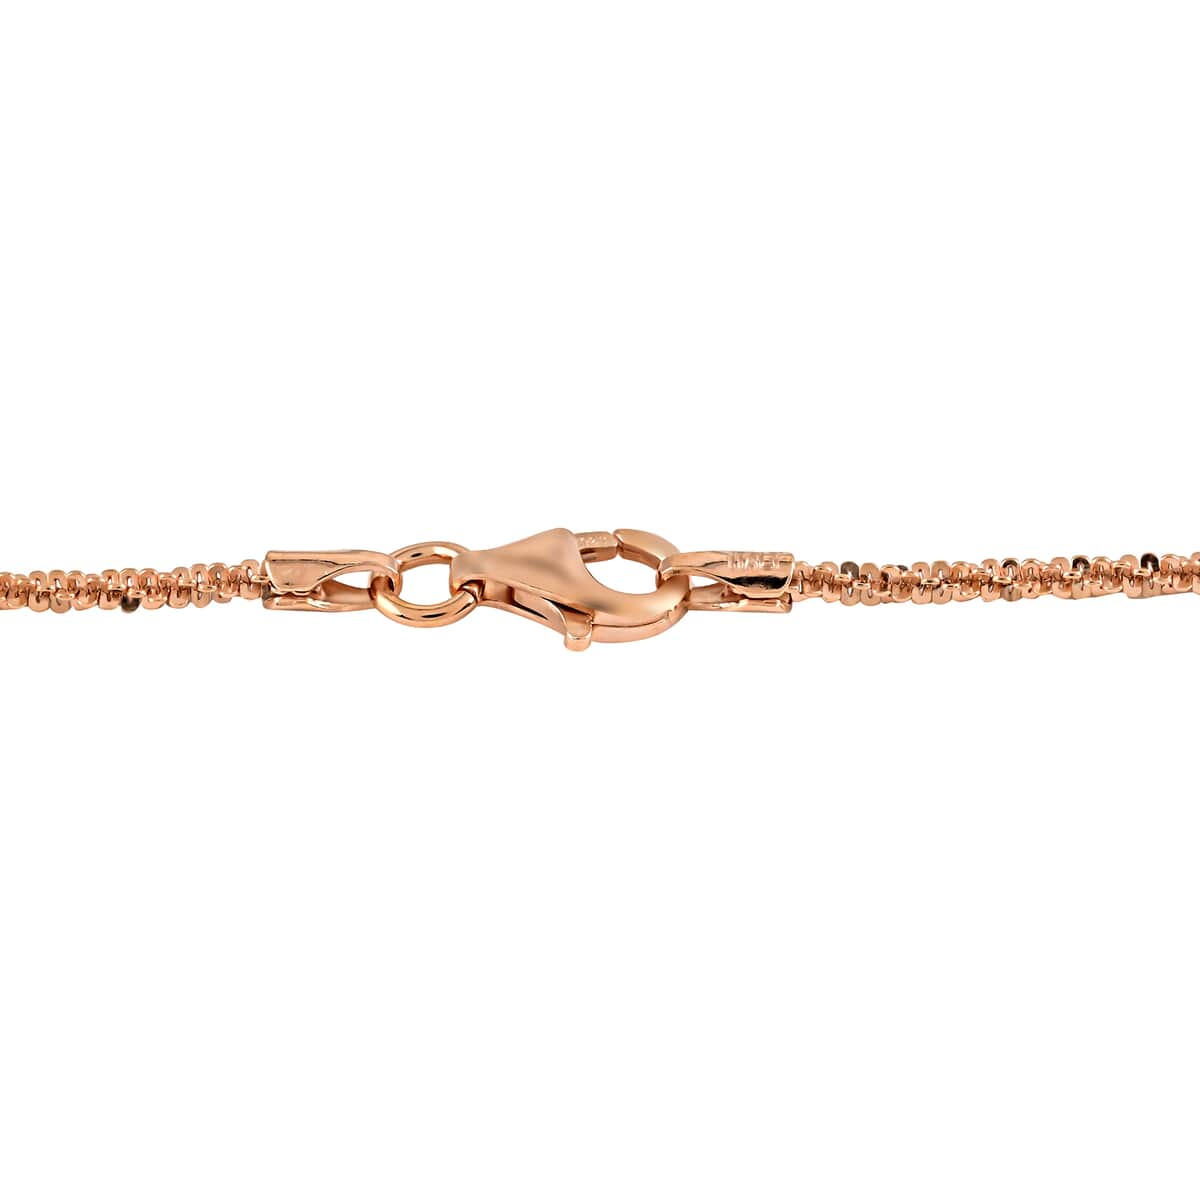 Italian 14K Rose Gold Over Sterling Silver 1.7mm Roc Necklace 30 Inches 5.3 Grams image number 2